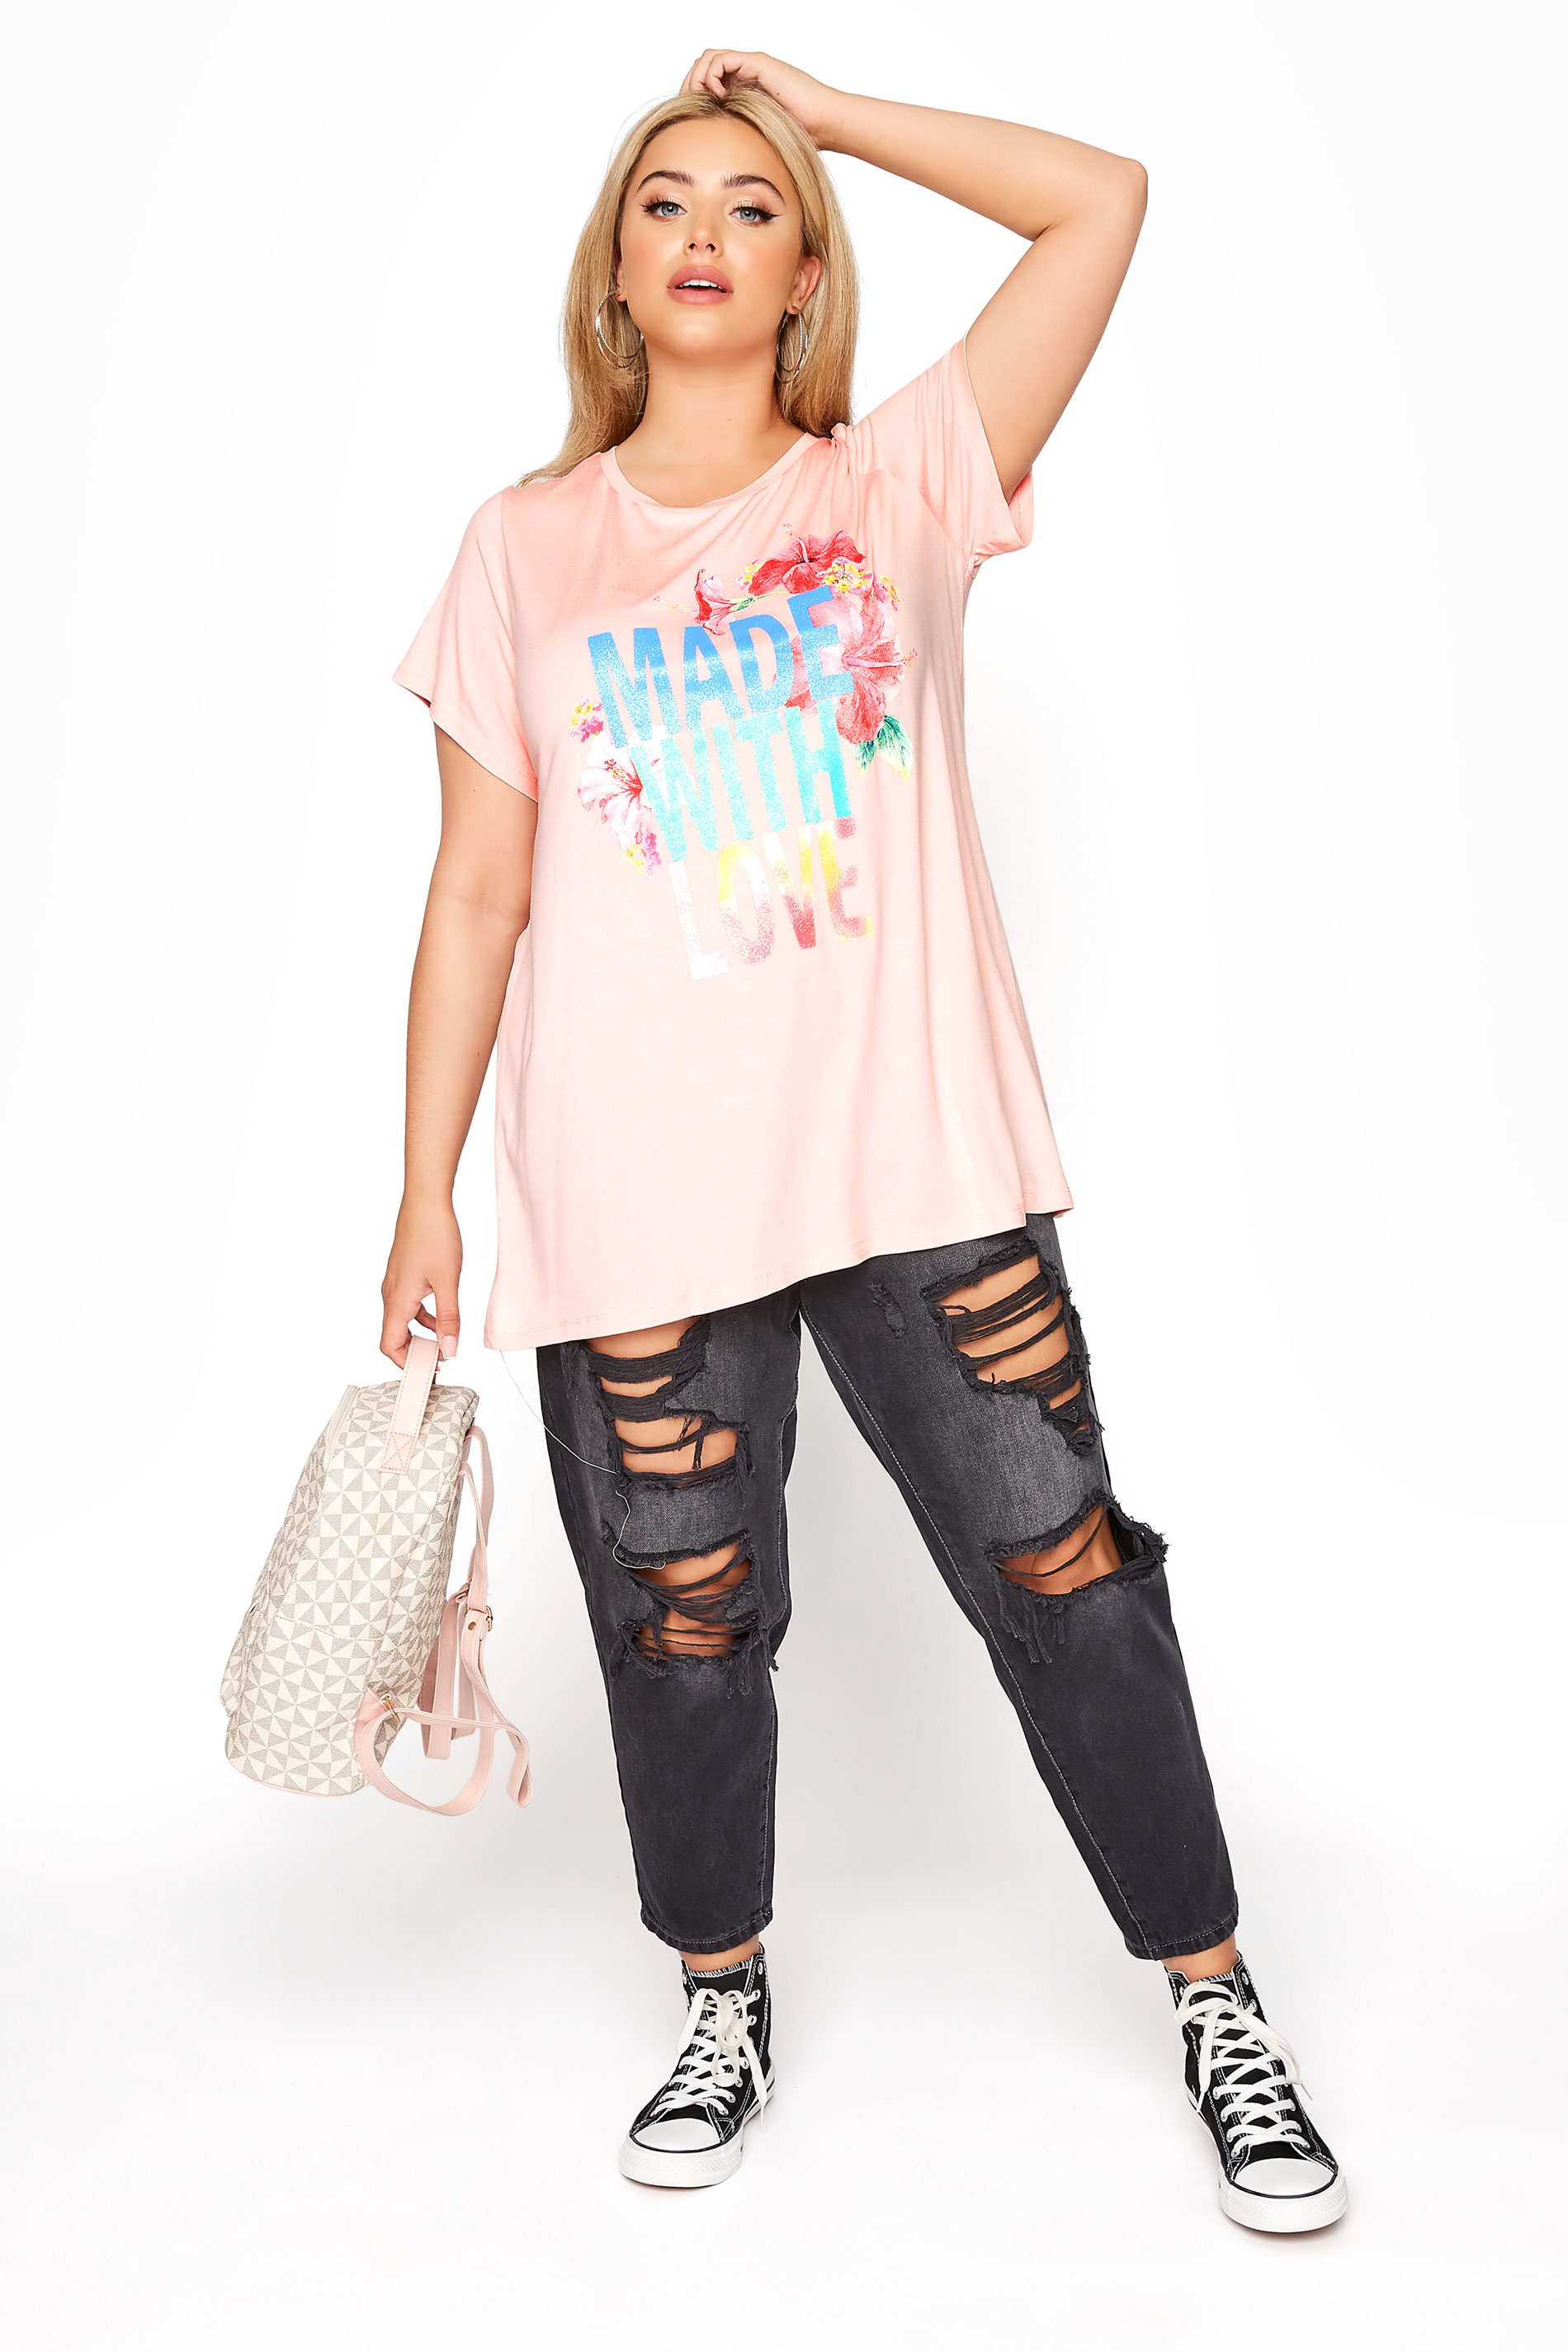 Grande taille  Tops Grande taille  Tops Casual | T-Shirt Rose Slogan 'Made With Love' - IL46201